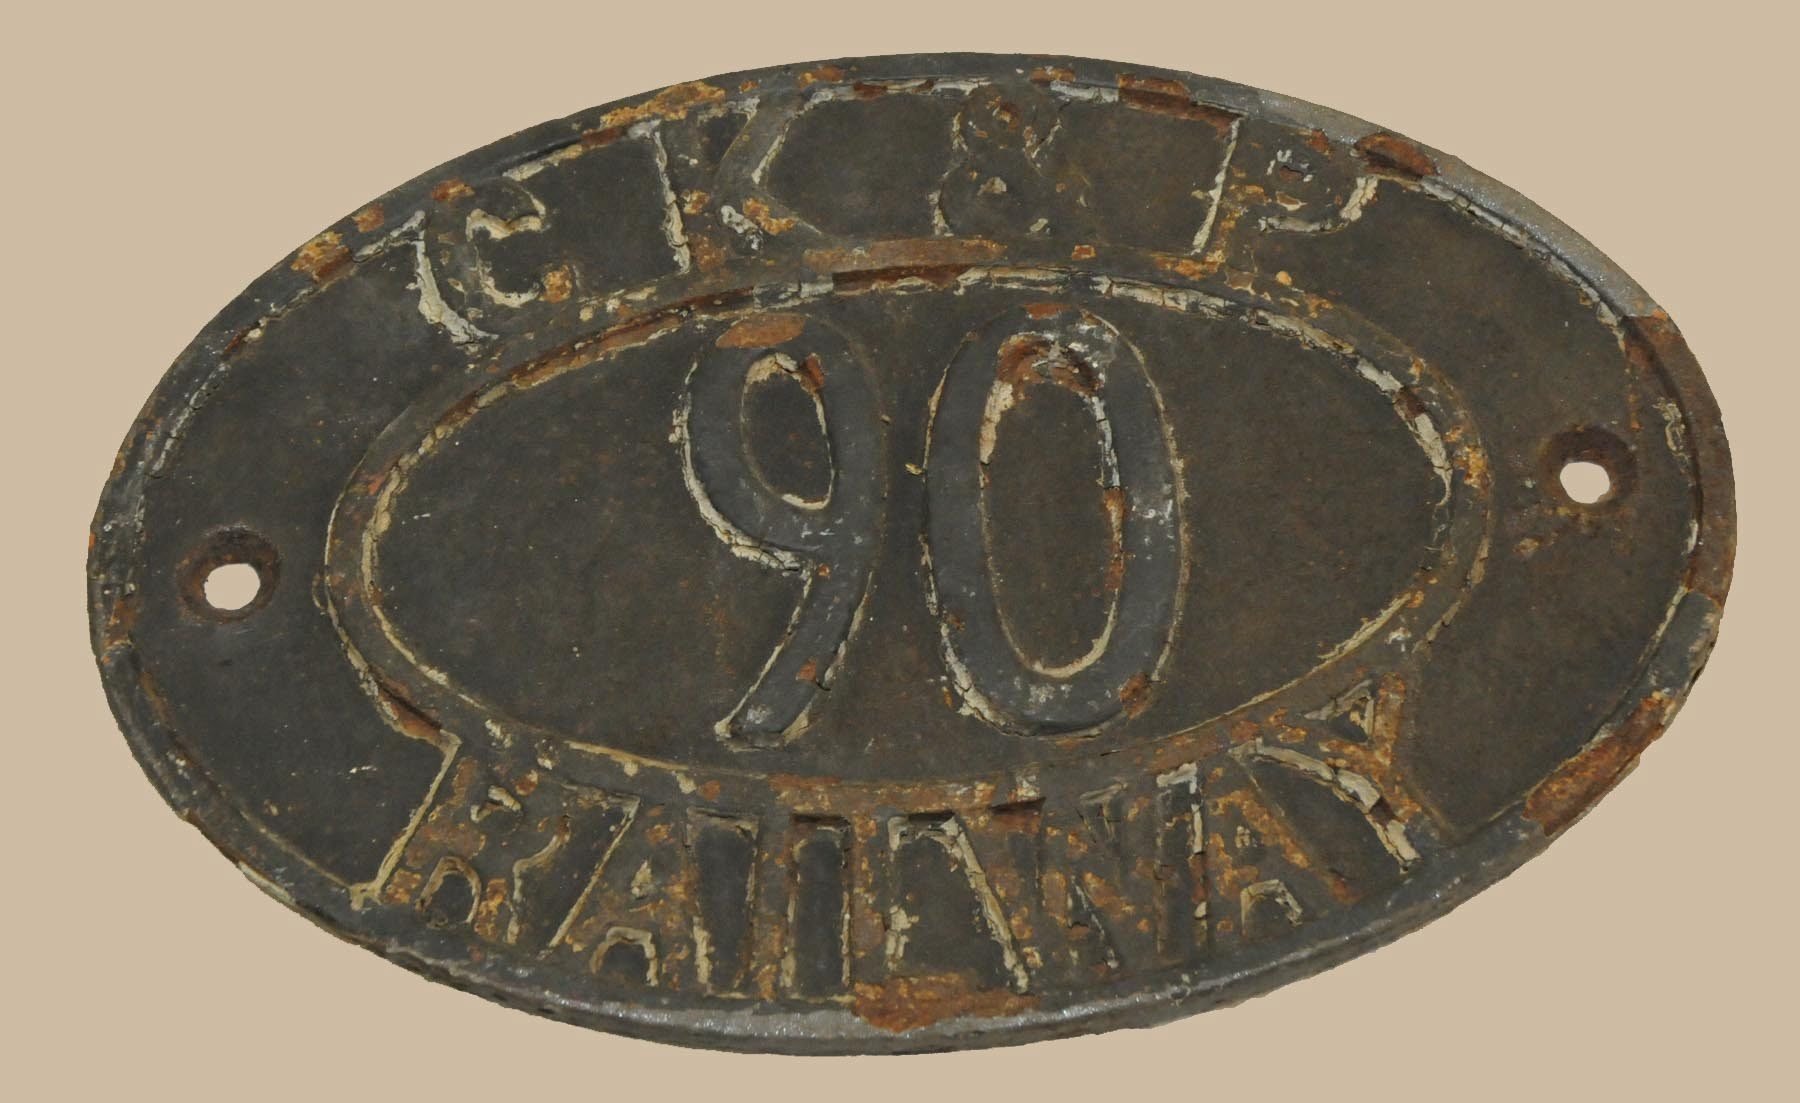 A bridge plate from the Cockermouth, Keswick & Penrith Railway being sold at Thomson, Roddick and Medcalf on August 2.********This picture has been acquired from an external source. It may have been submitted or downloaded from the Internet. Seek approval